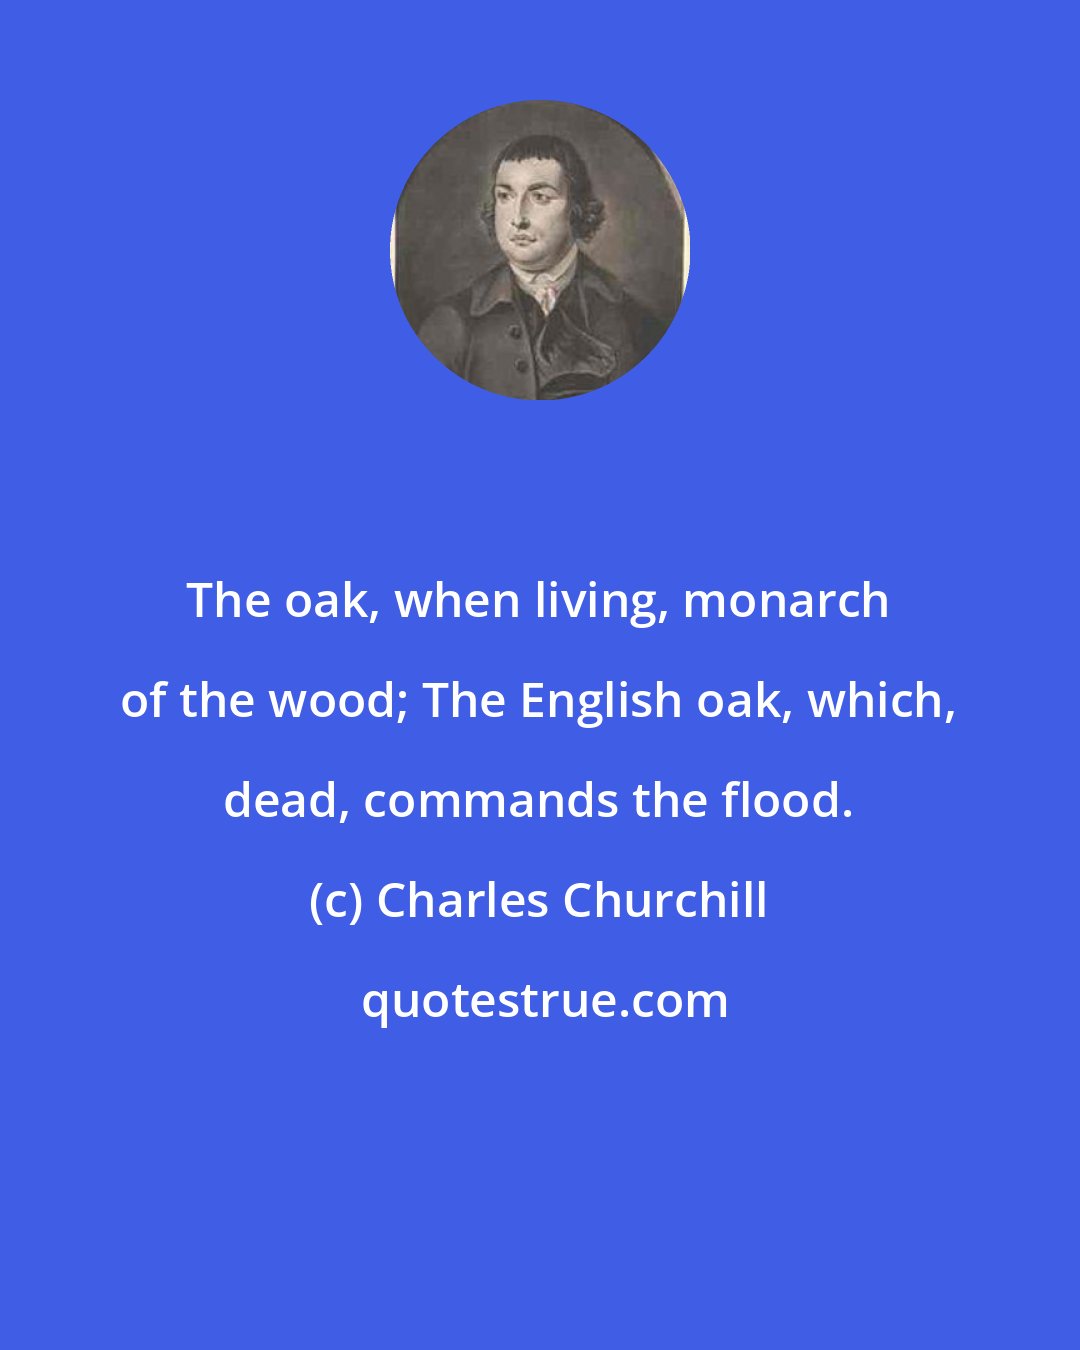 Charles Churchill: The oak, when living, monarch of the wood; The English oak, which, dead, commands the flood.